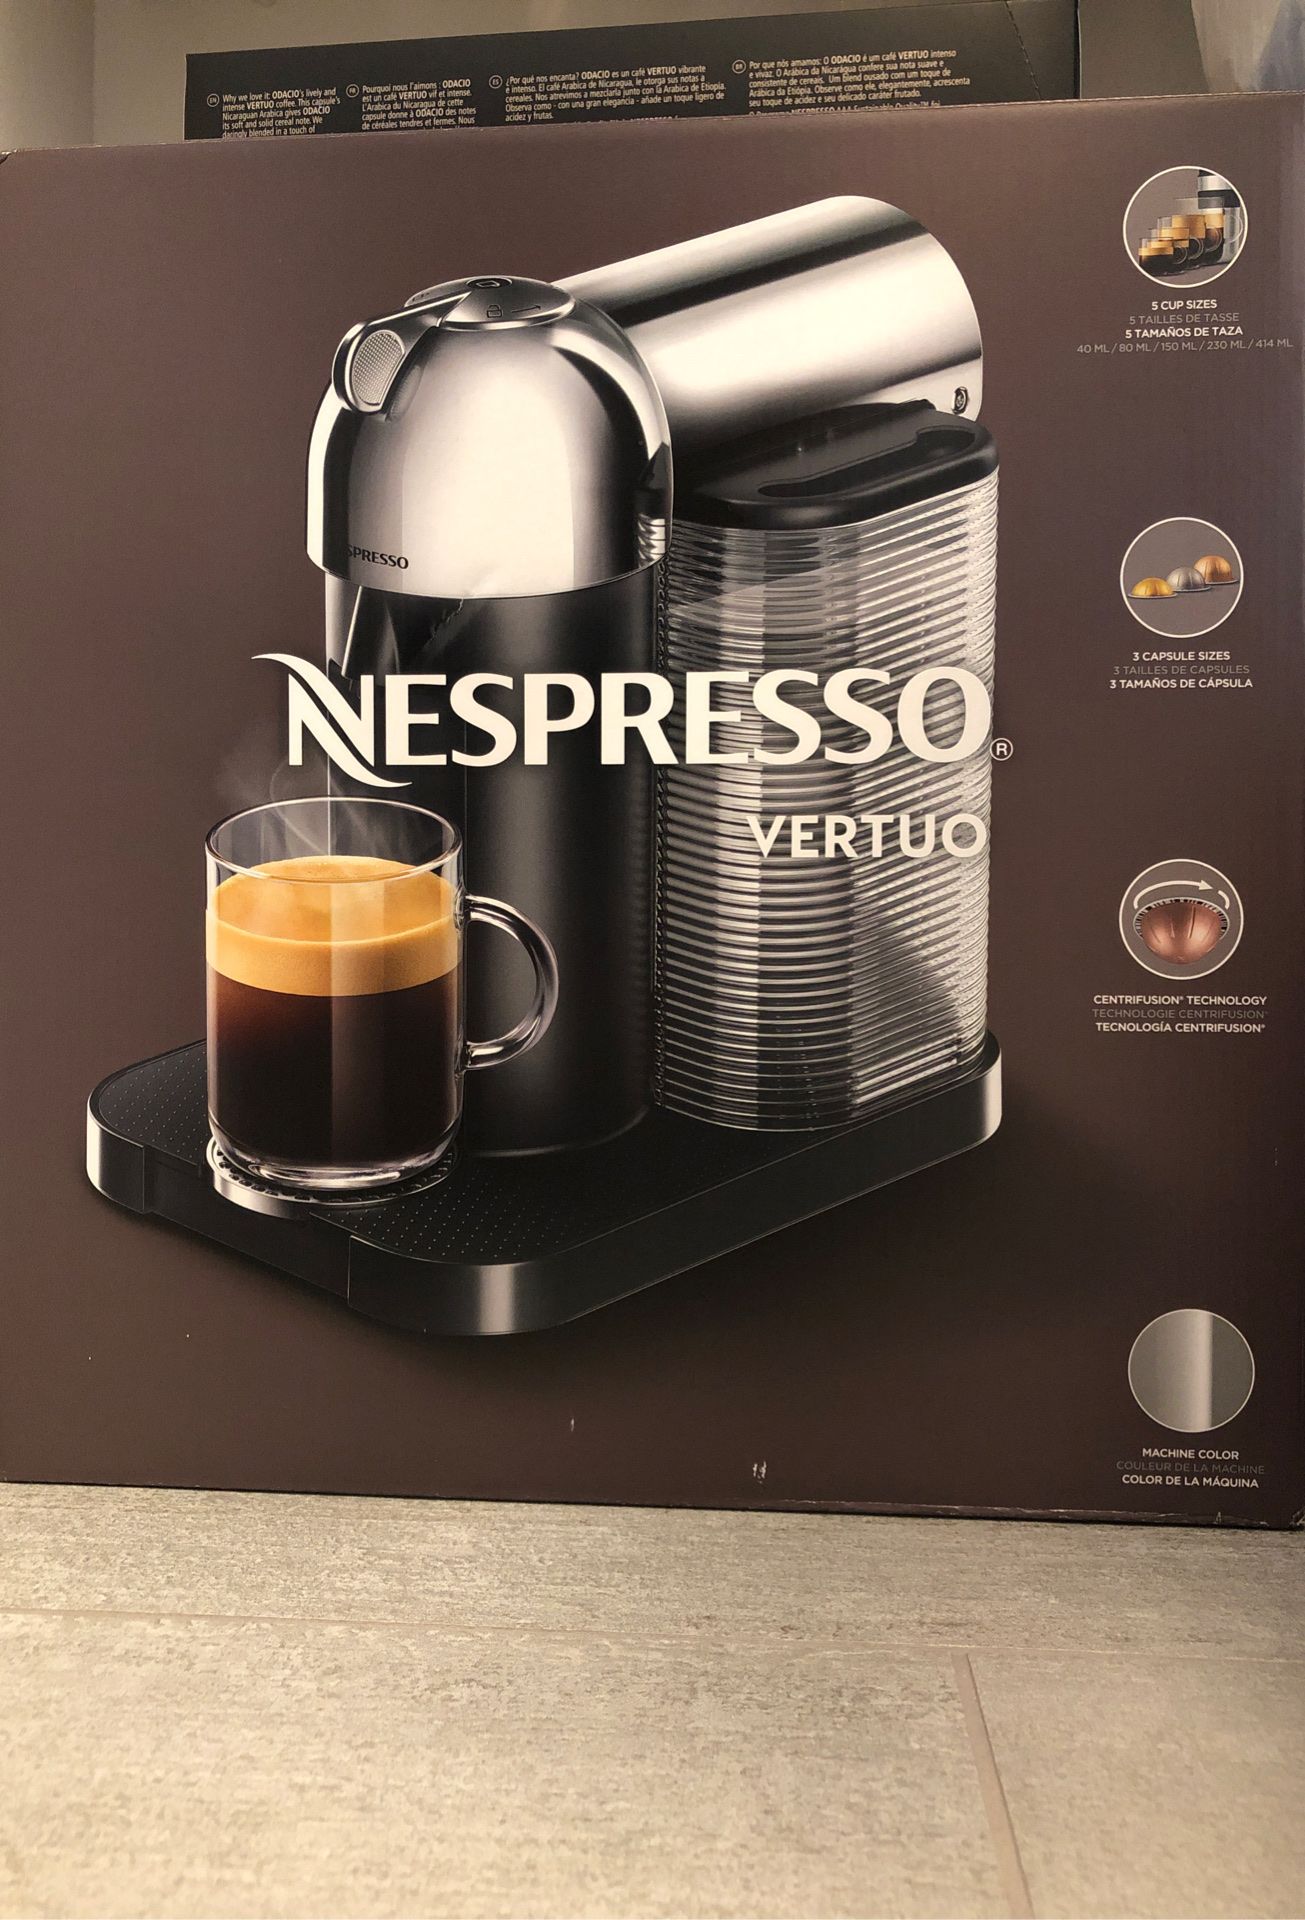 Nespresso Vertuo chrome coffee maker along with 20 capsules Box never opened brand new Sells for 199 +20 for capsules Great Xmas give to tha